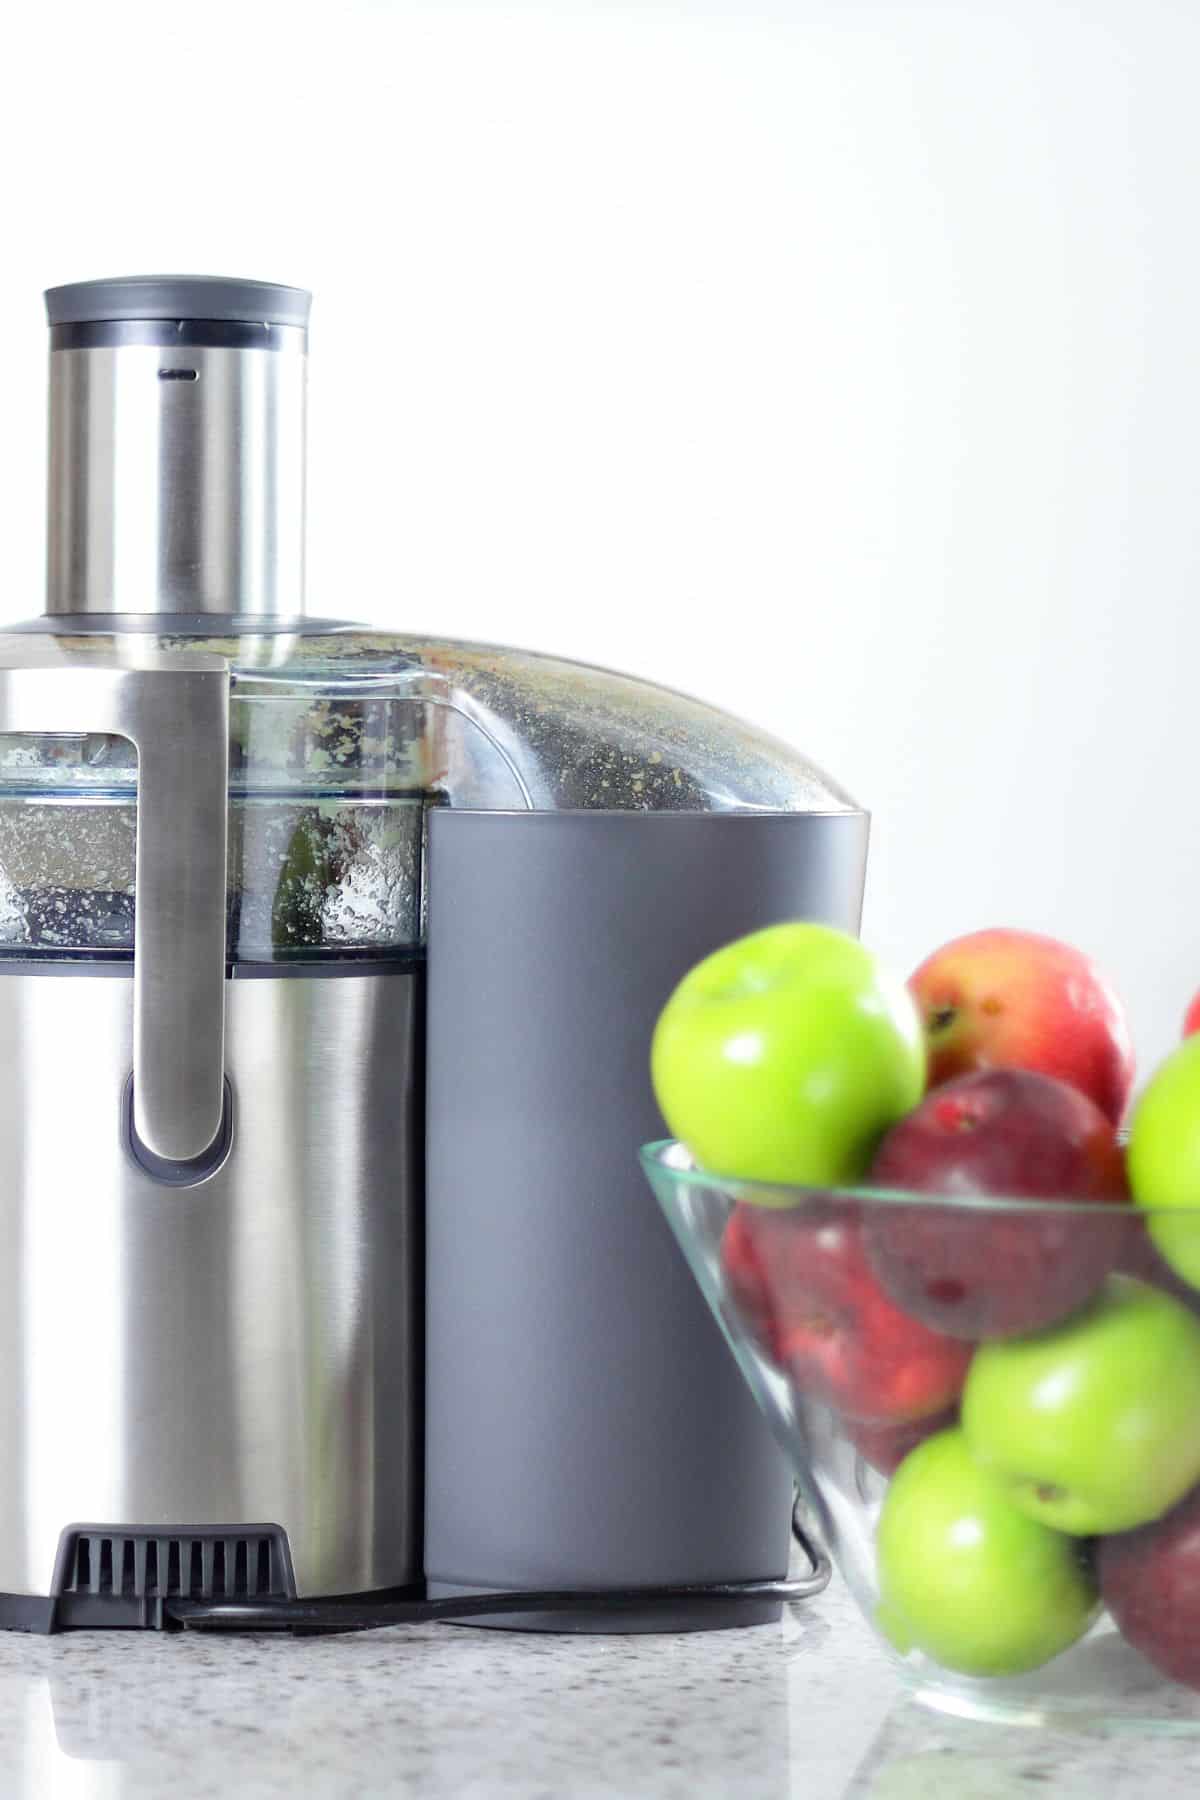 A juicer next to a bowl of red and green apples.